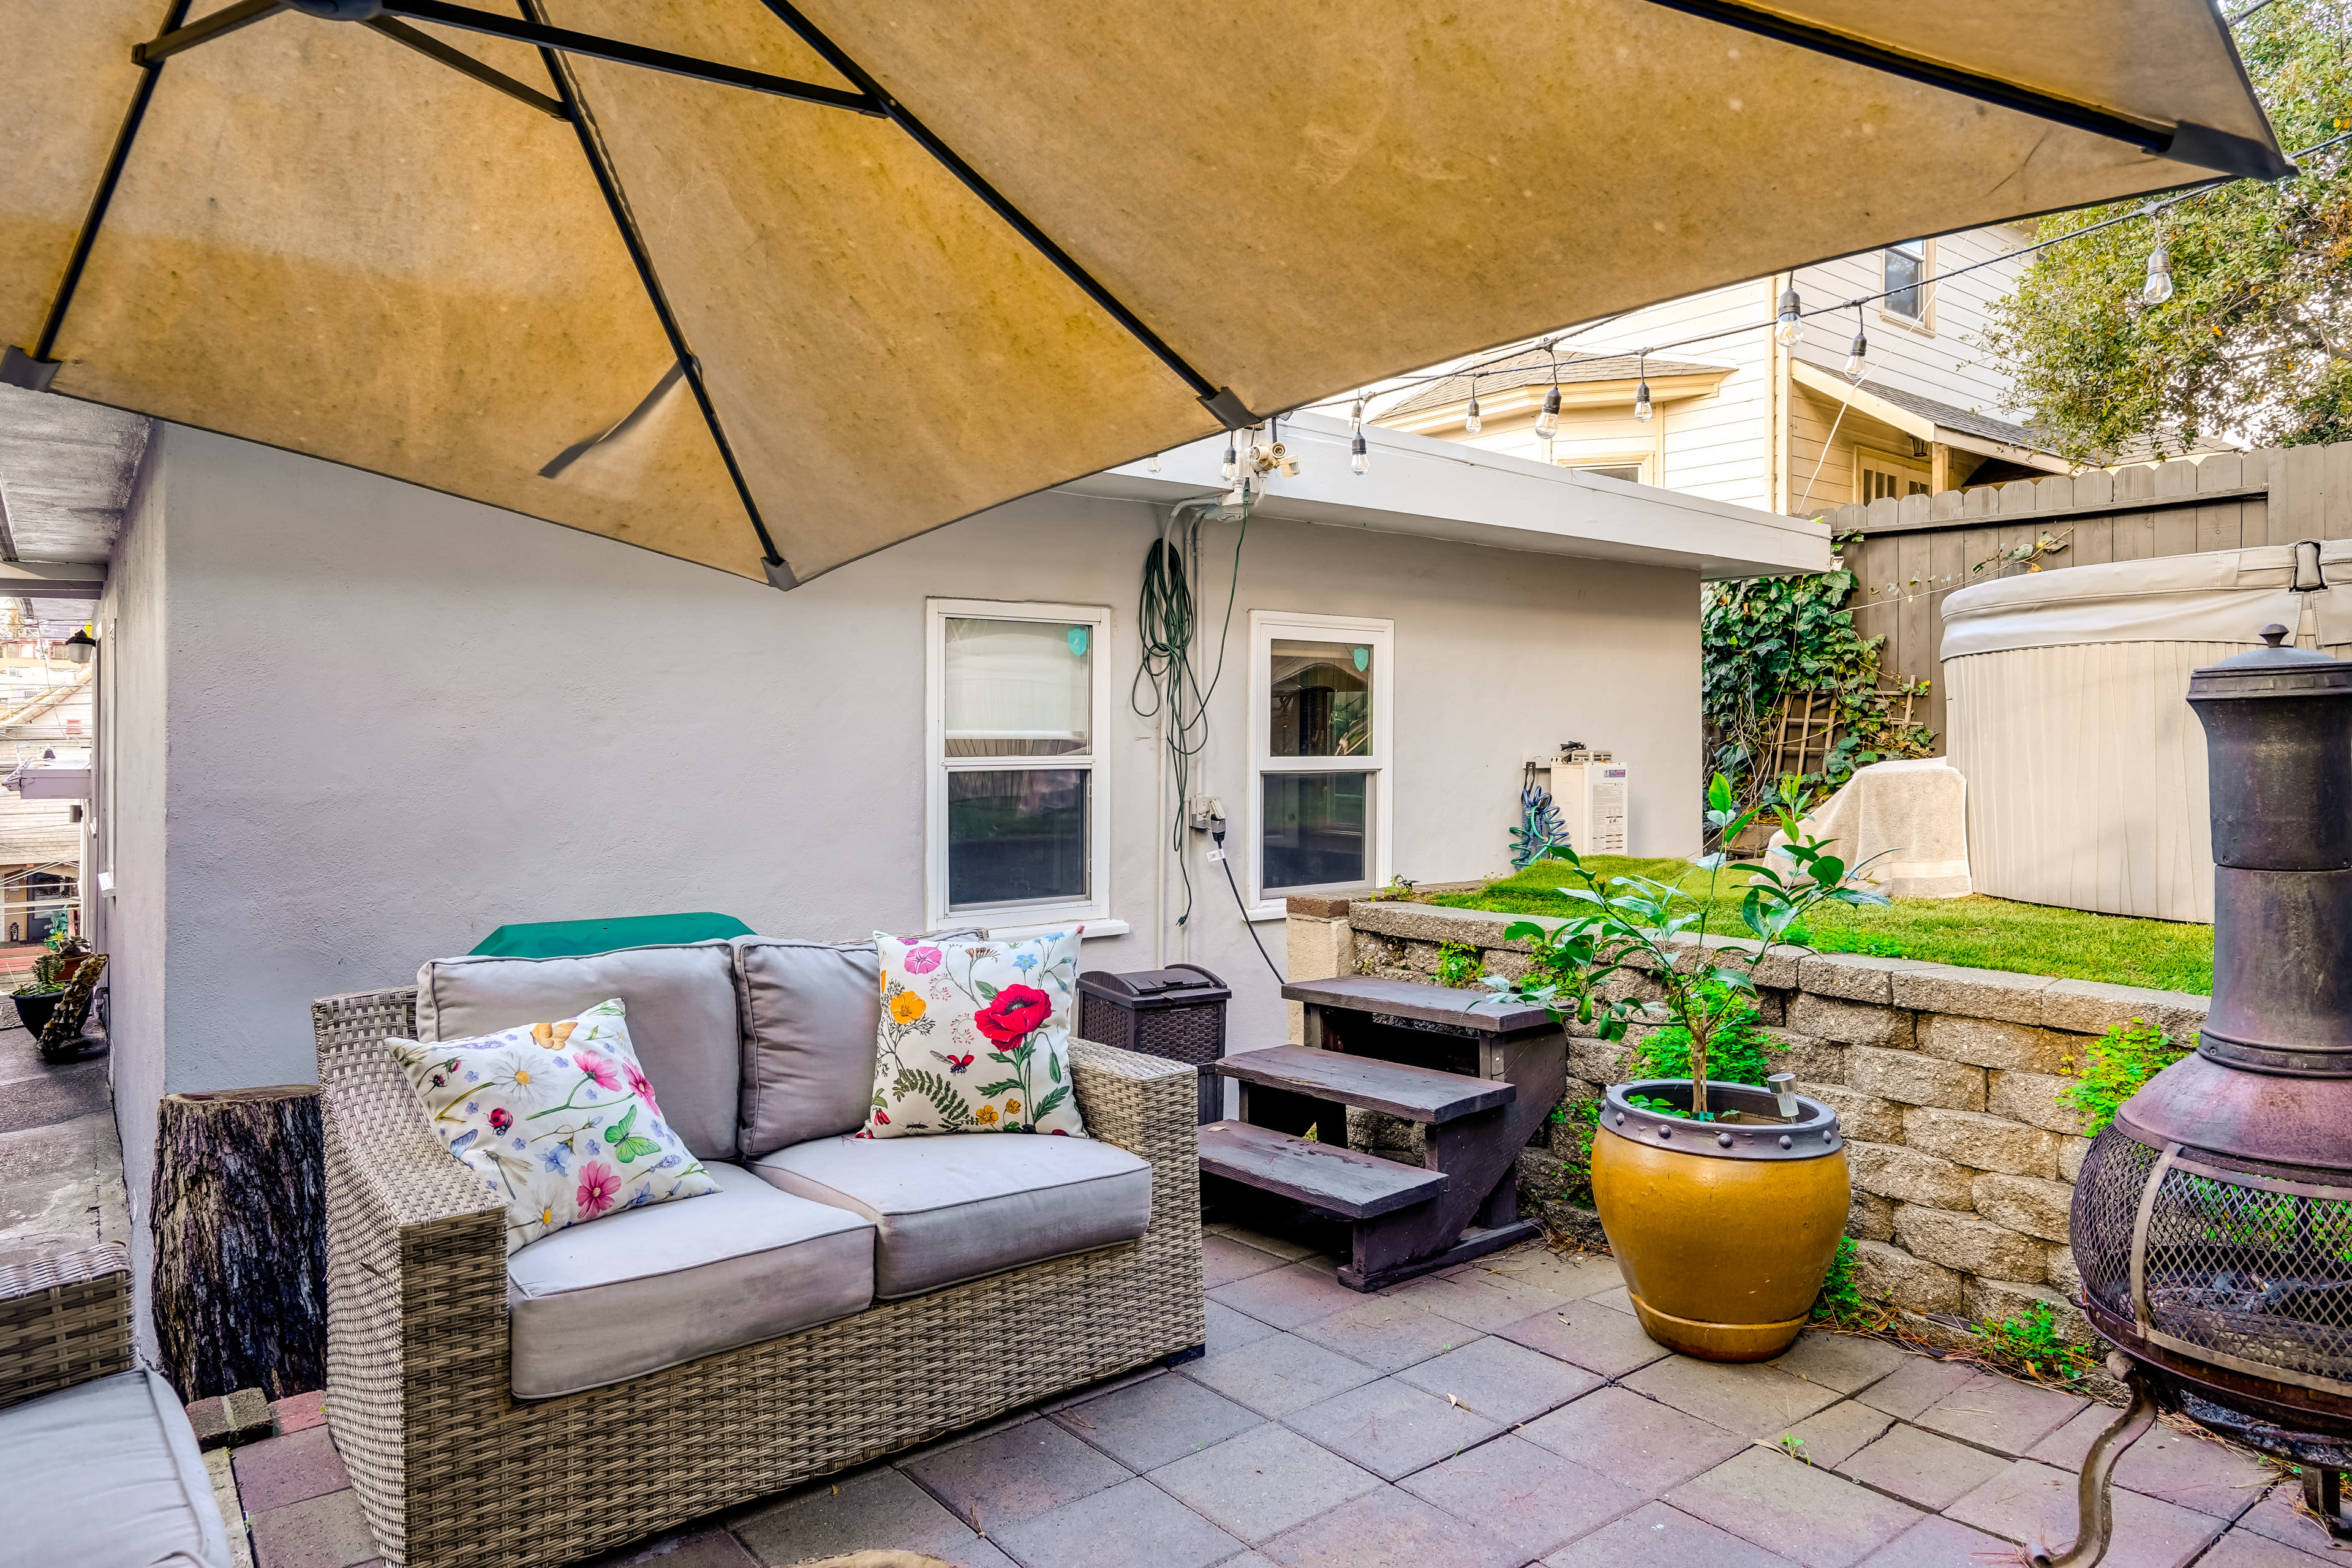 Shared Outdoor Entertainment Area | Patio | Fire Pit | Gas Grill